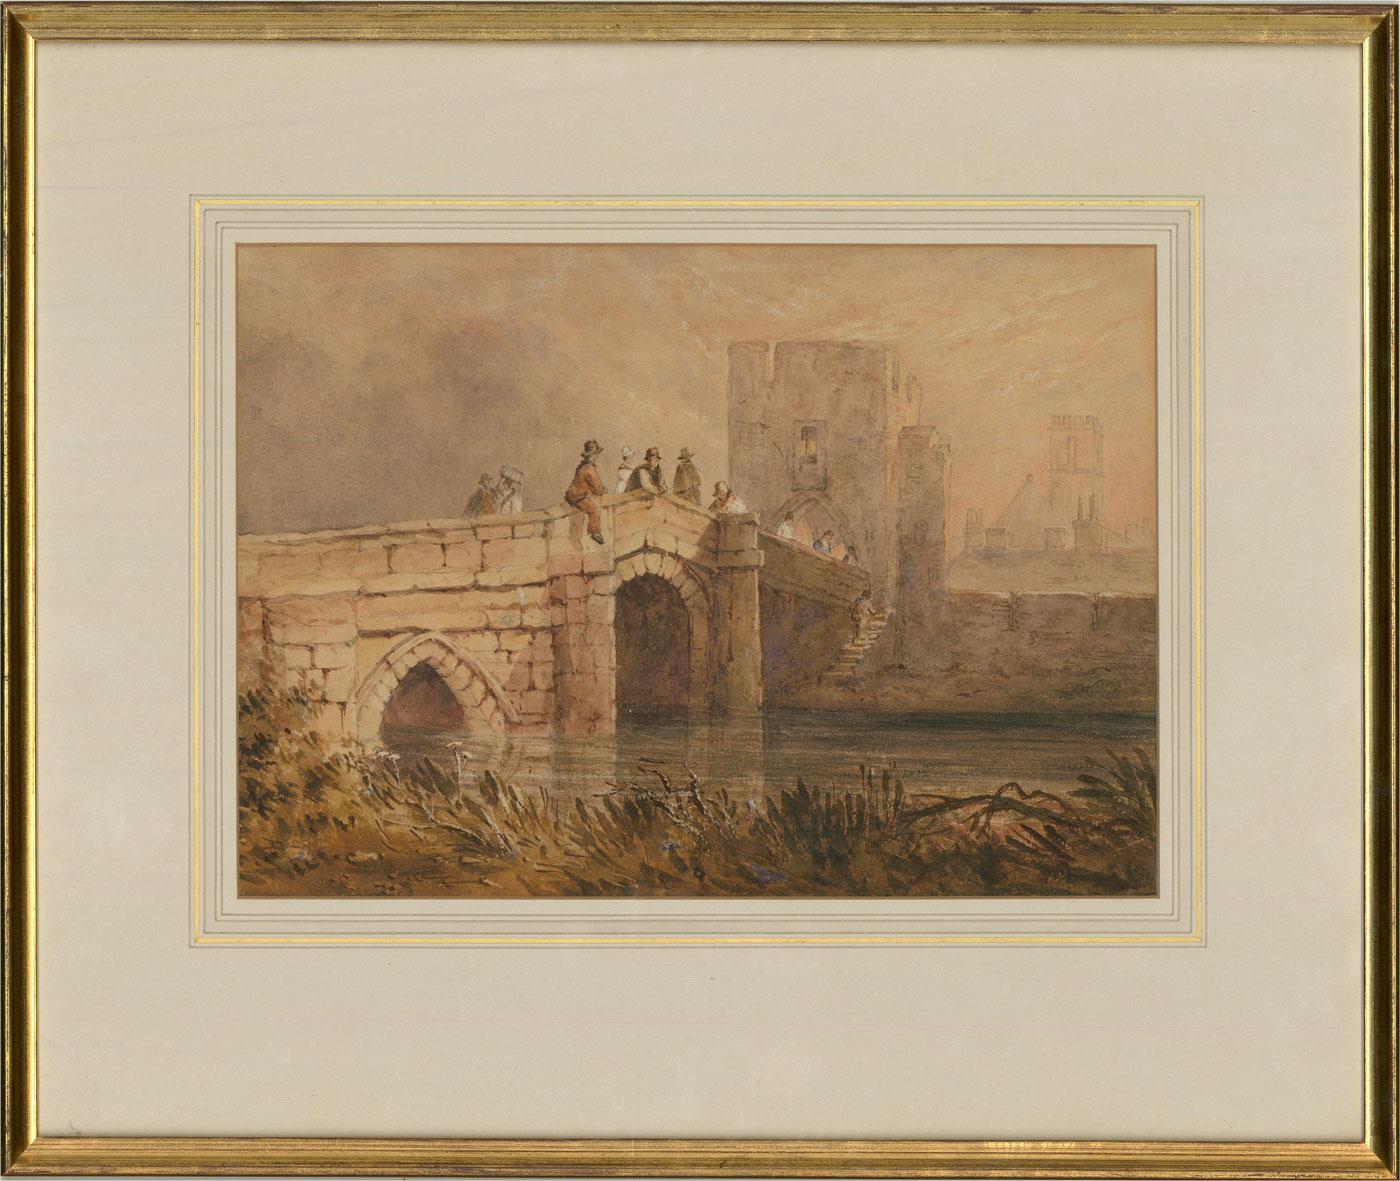 A very fine example of an early 19thC watercolour showing an arched bridge over a river that joins to a gatehouse in a city's walls. The bridge is busy with people coming and going; one man straddles the bridge wall, letting his leg dangle over the